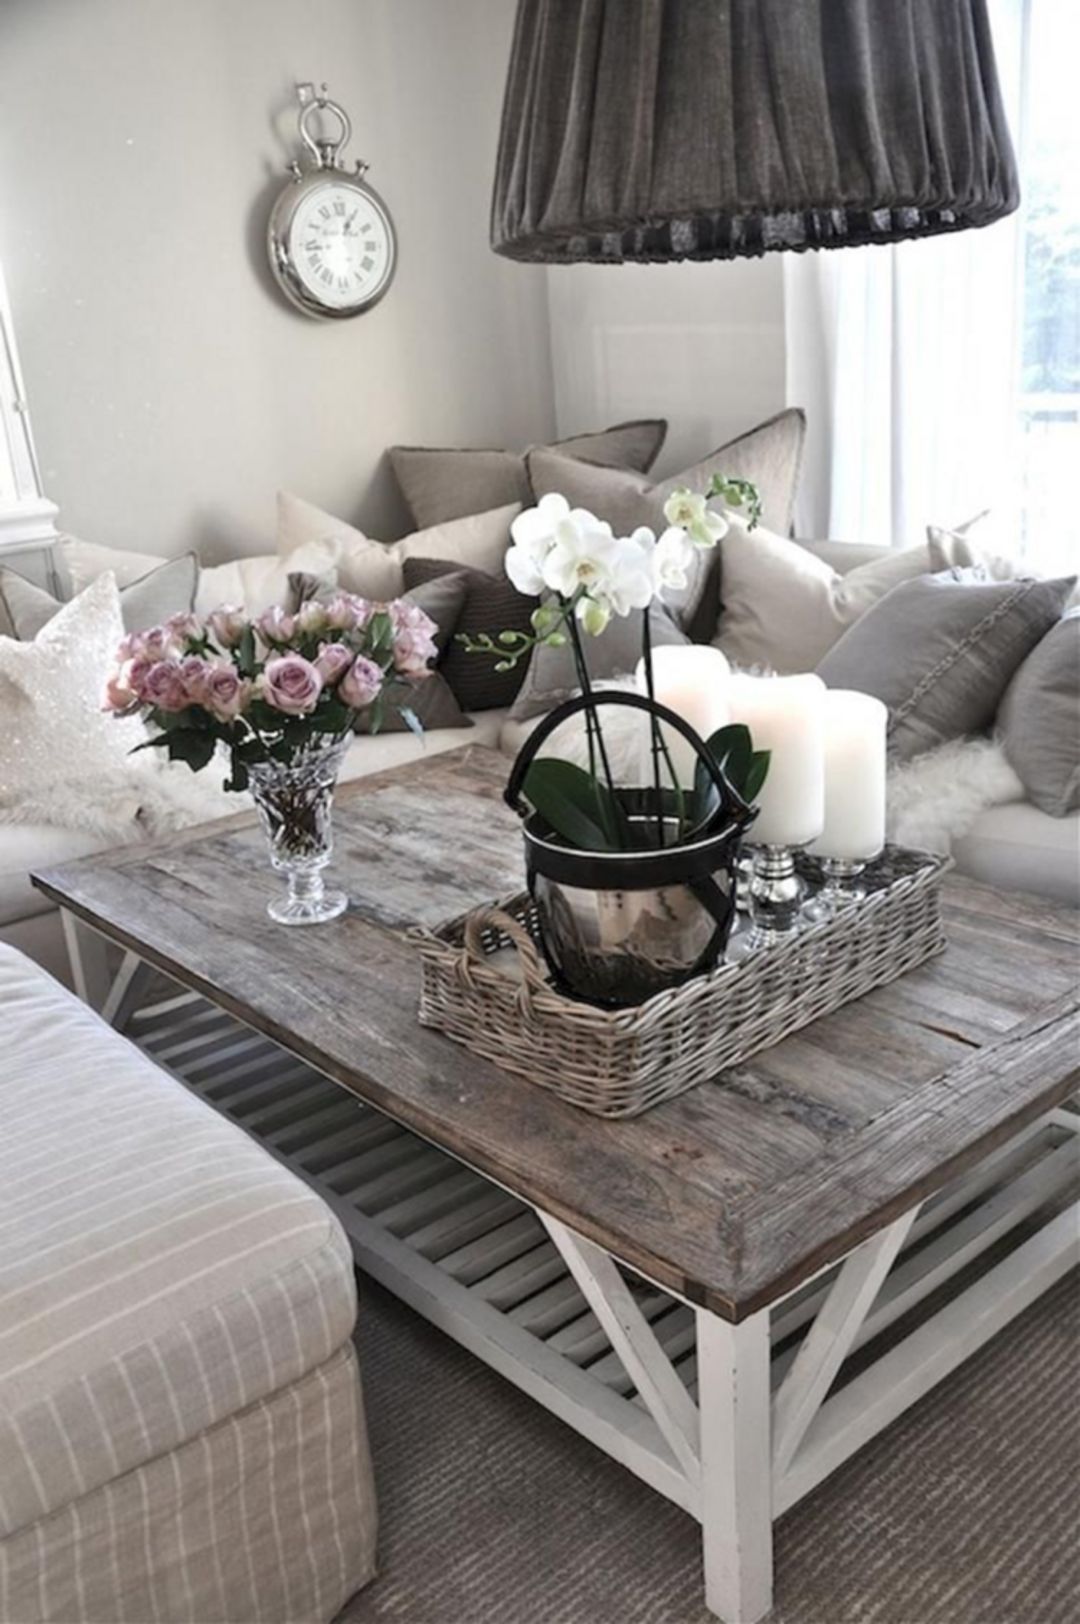 Adorable 25+ Great Farmhouse Coffee Table Design And Decor Ideas Https With Regard To Living Room Farmhouse Coffee Tables (View 3 of 20)